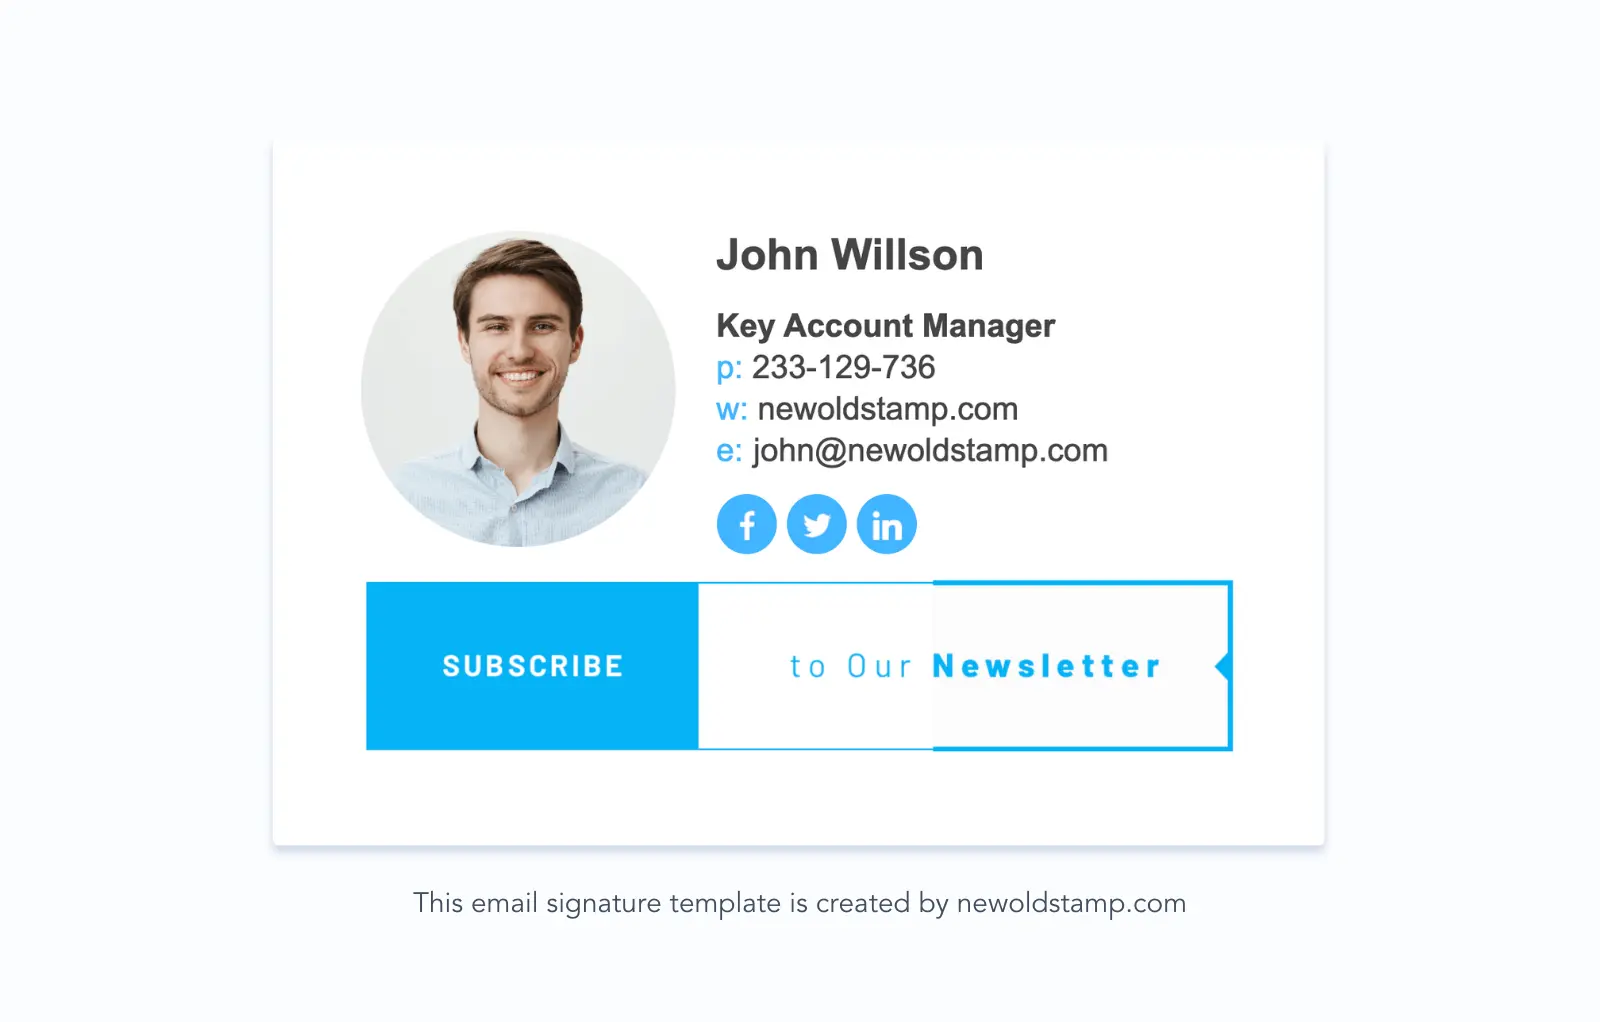 email signature marketing - subscribe to newsletter